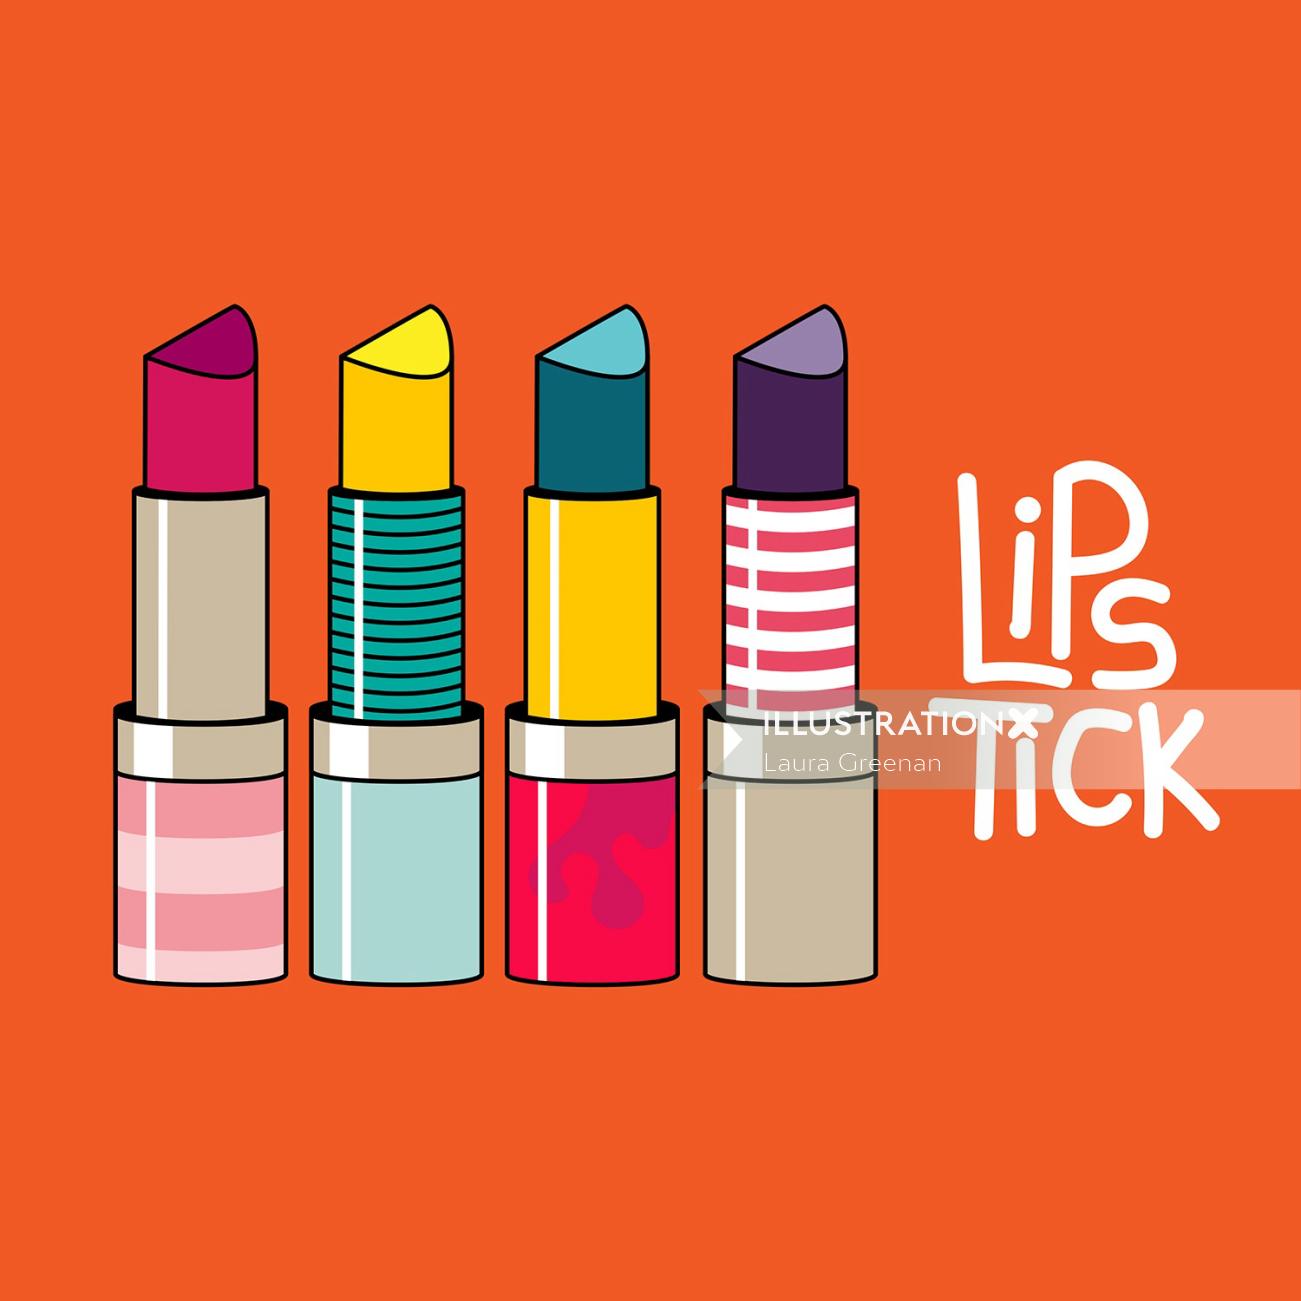 A spot illustration of some colourful and patterned lipstick cases.